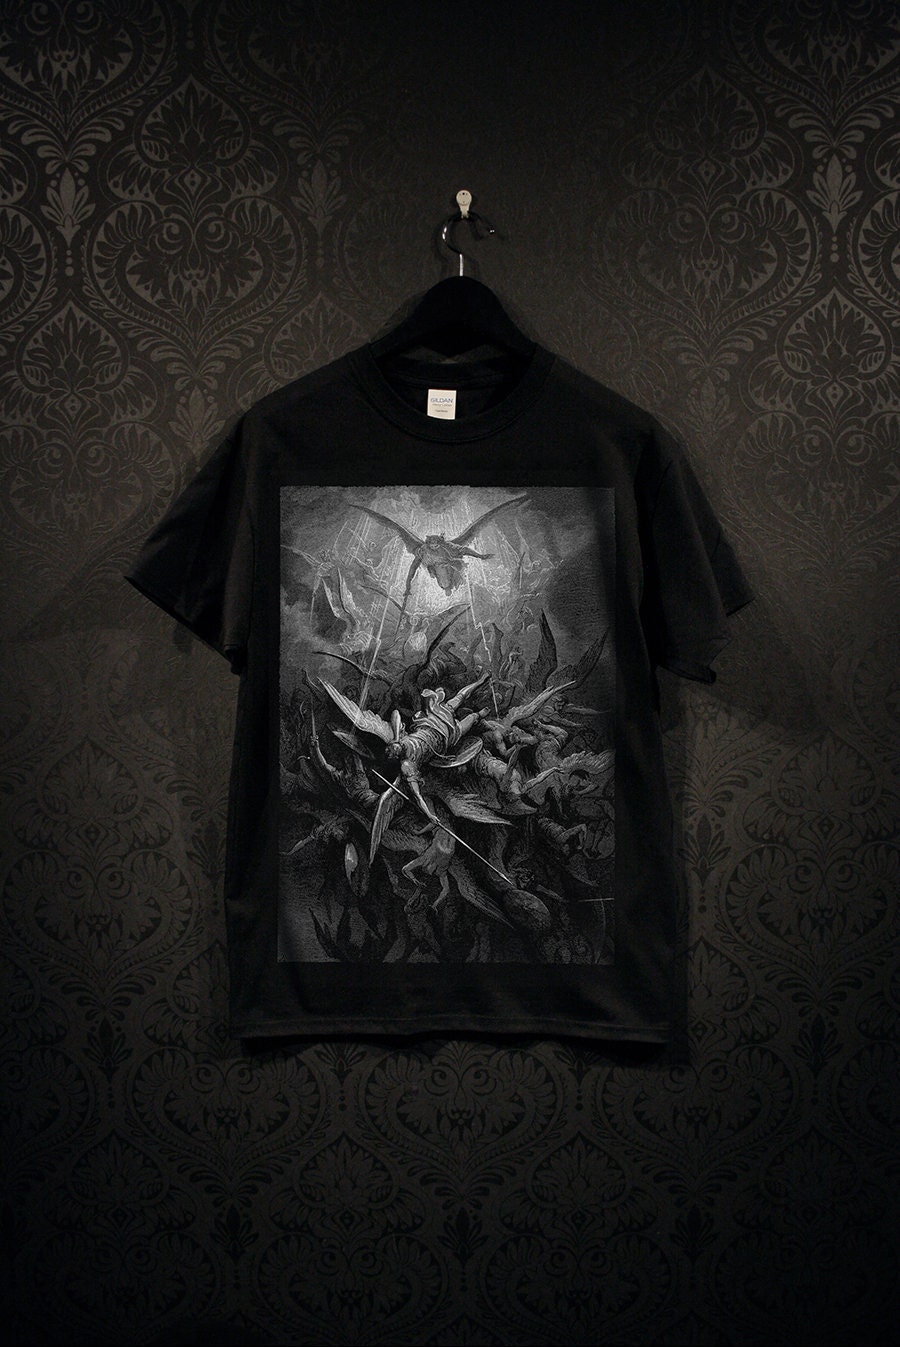 The last judgement by Gustave Dor (paradise lost) - T-shirt